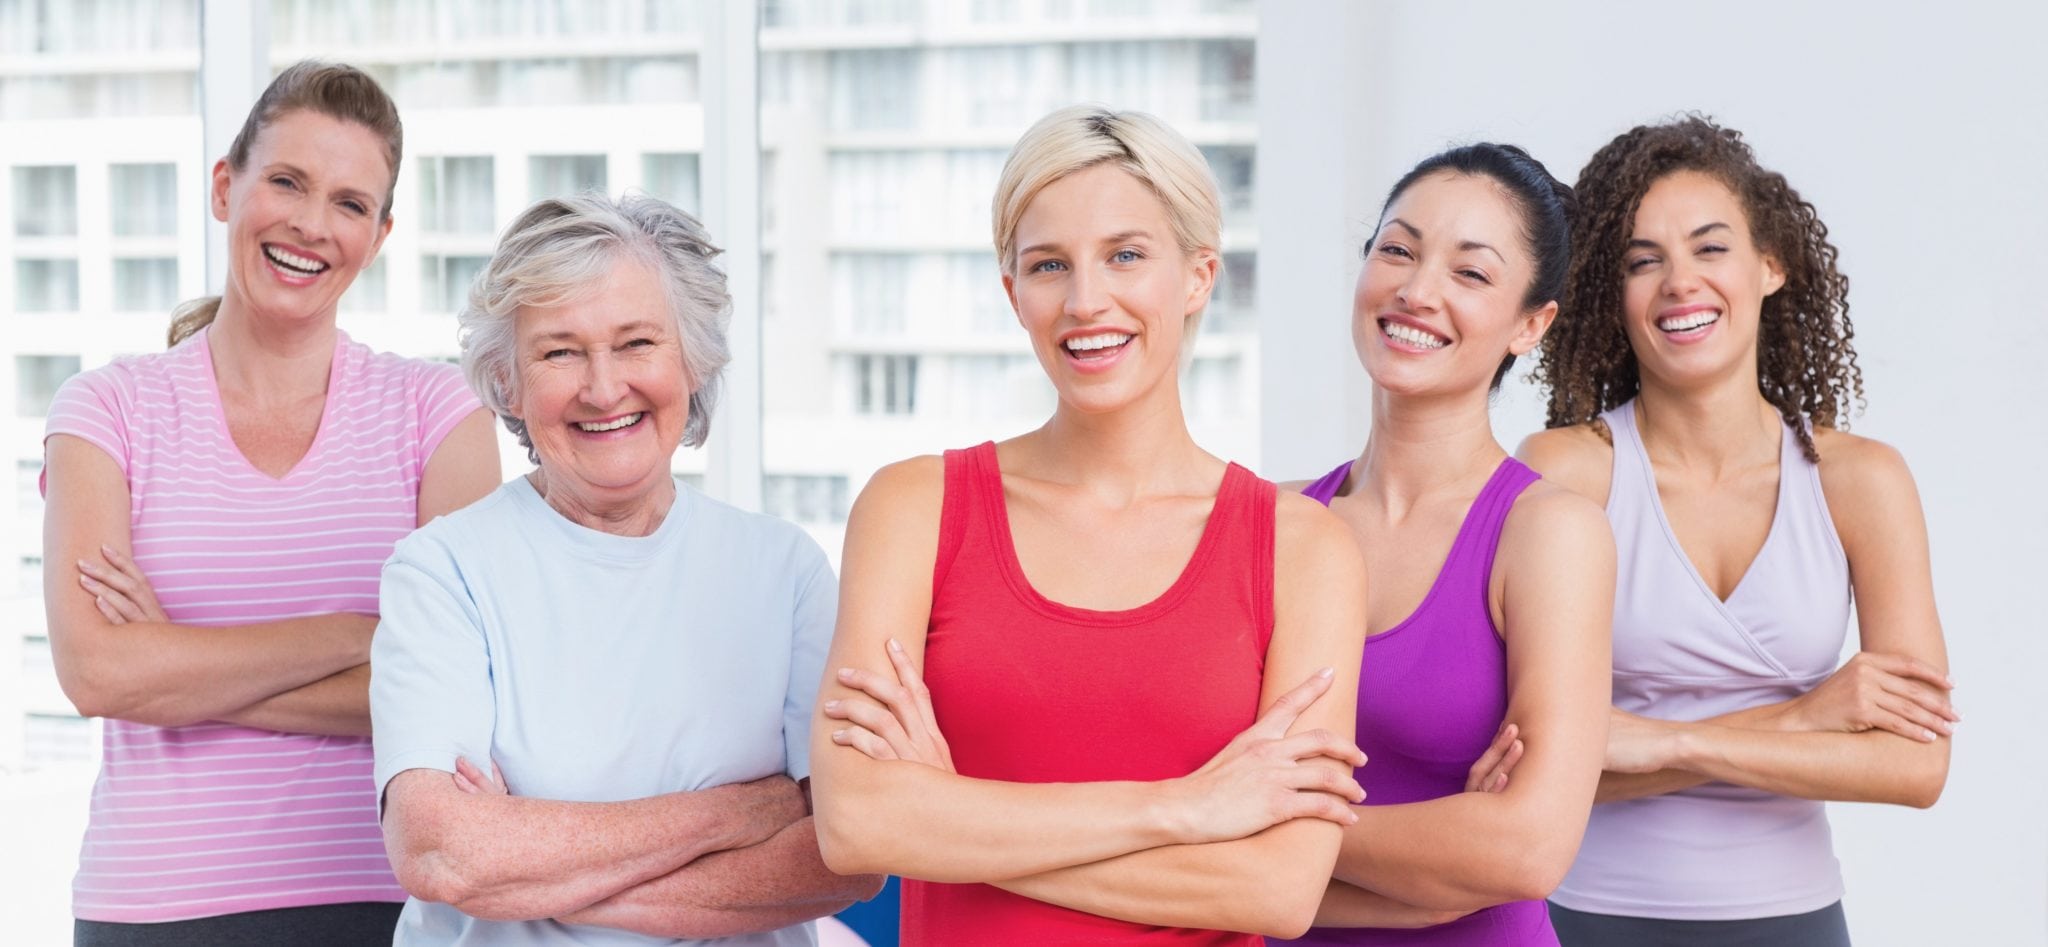 Make Health A Priority During National Women’s Health Week